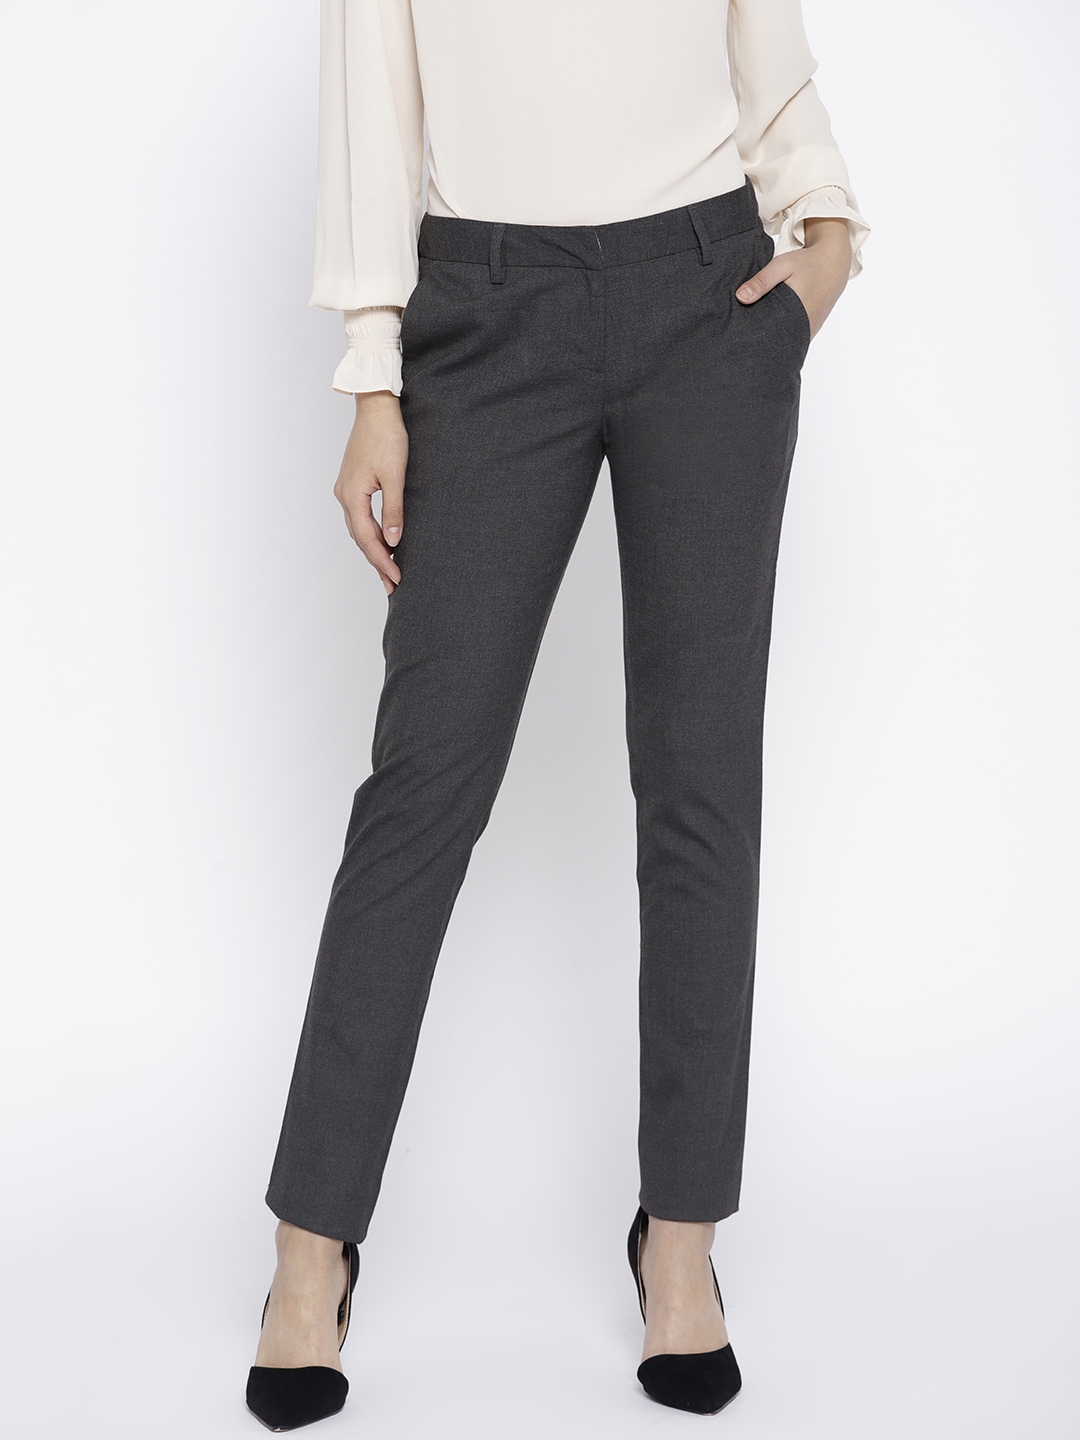 Buy Wills Lifestyle Women Charcoal Grey Slim Fit Solid Formal Trousers   Trousers for Women 7730171  Myntra